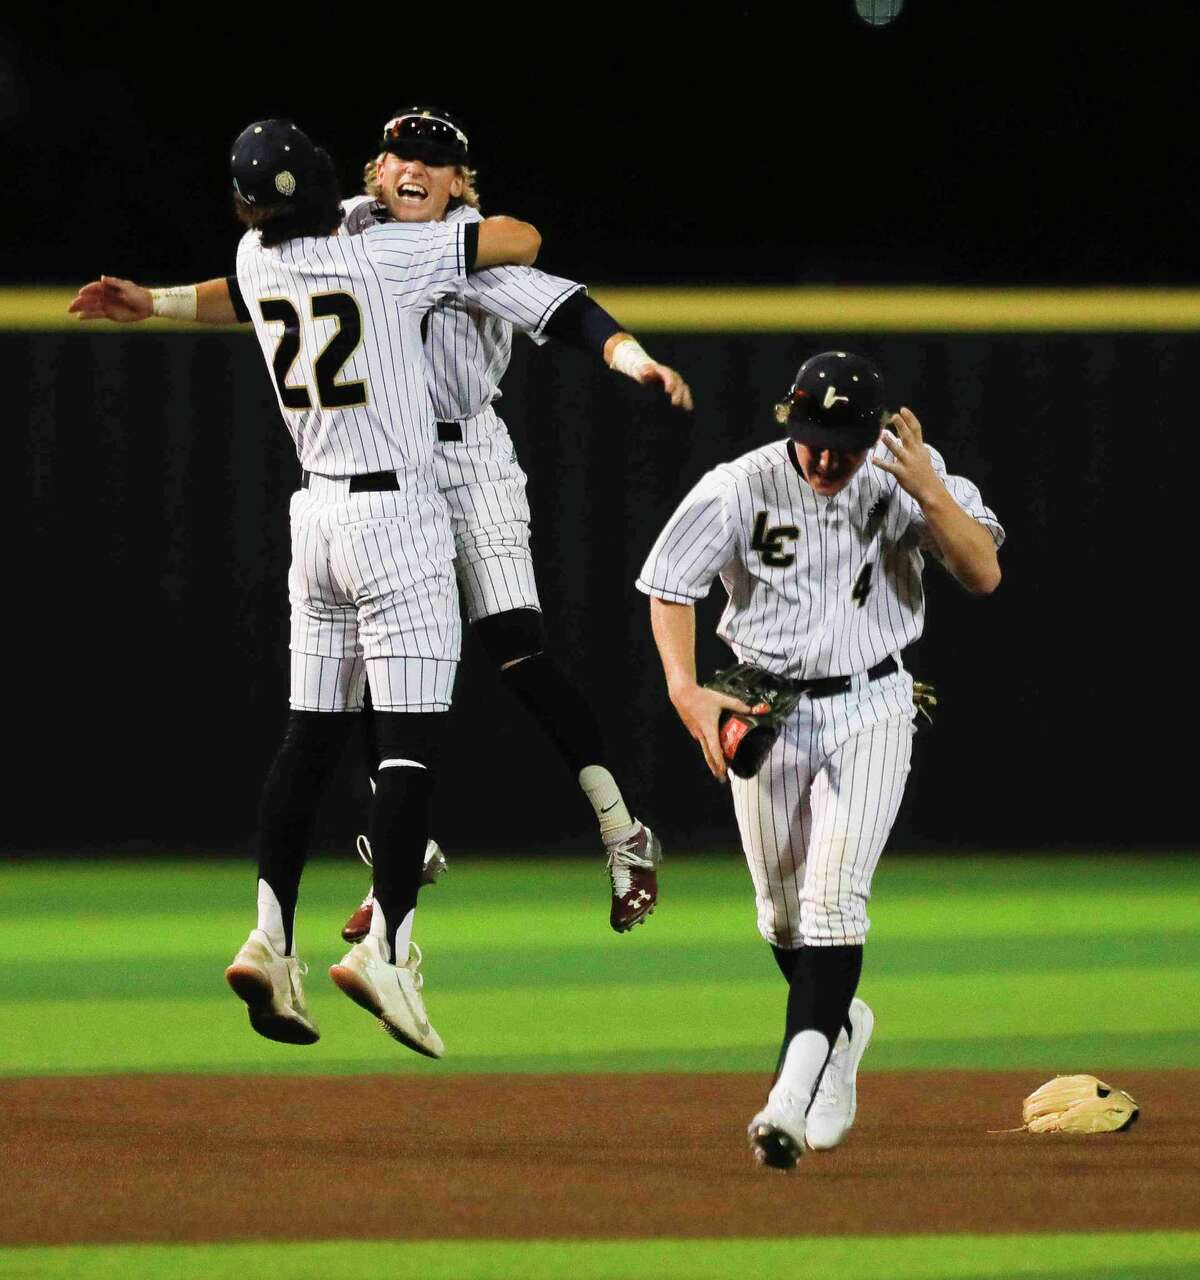 Lake Creek’s Jaron Lyness, center, and Jake Haag celebrate after the team’s 6-2 win over Milby in Game 2 of a Region III-5A semifinal high school baseball playoff series at Langham Creek High School, Friday, May 27, 2022, in Cypress.